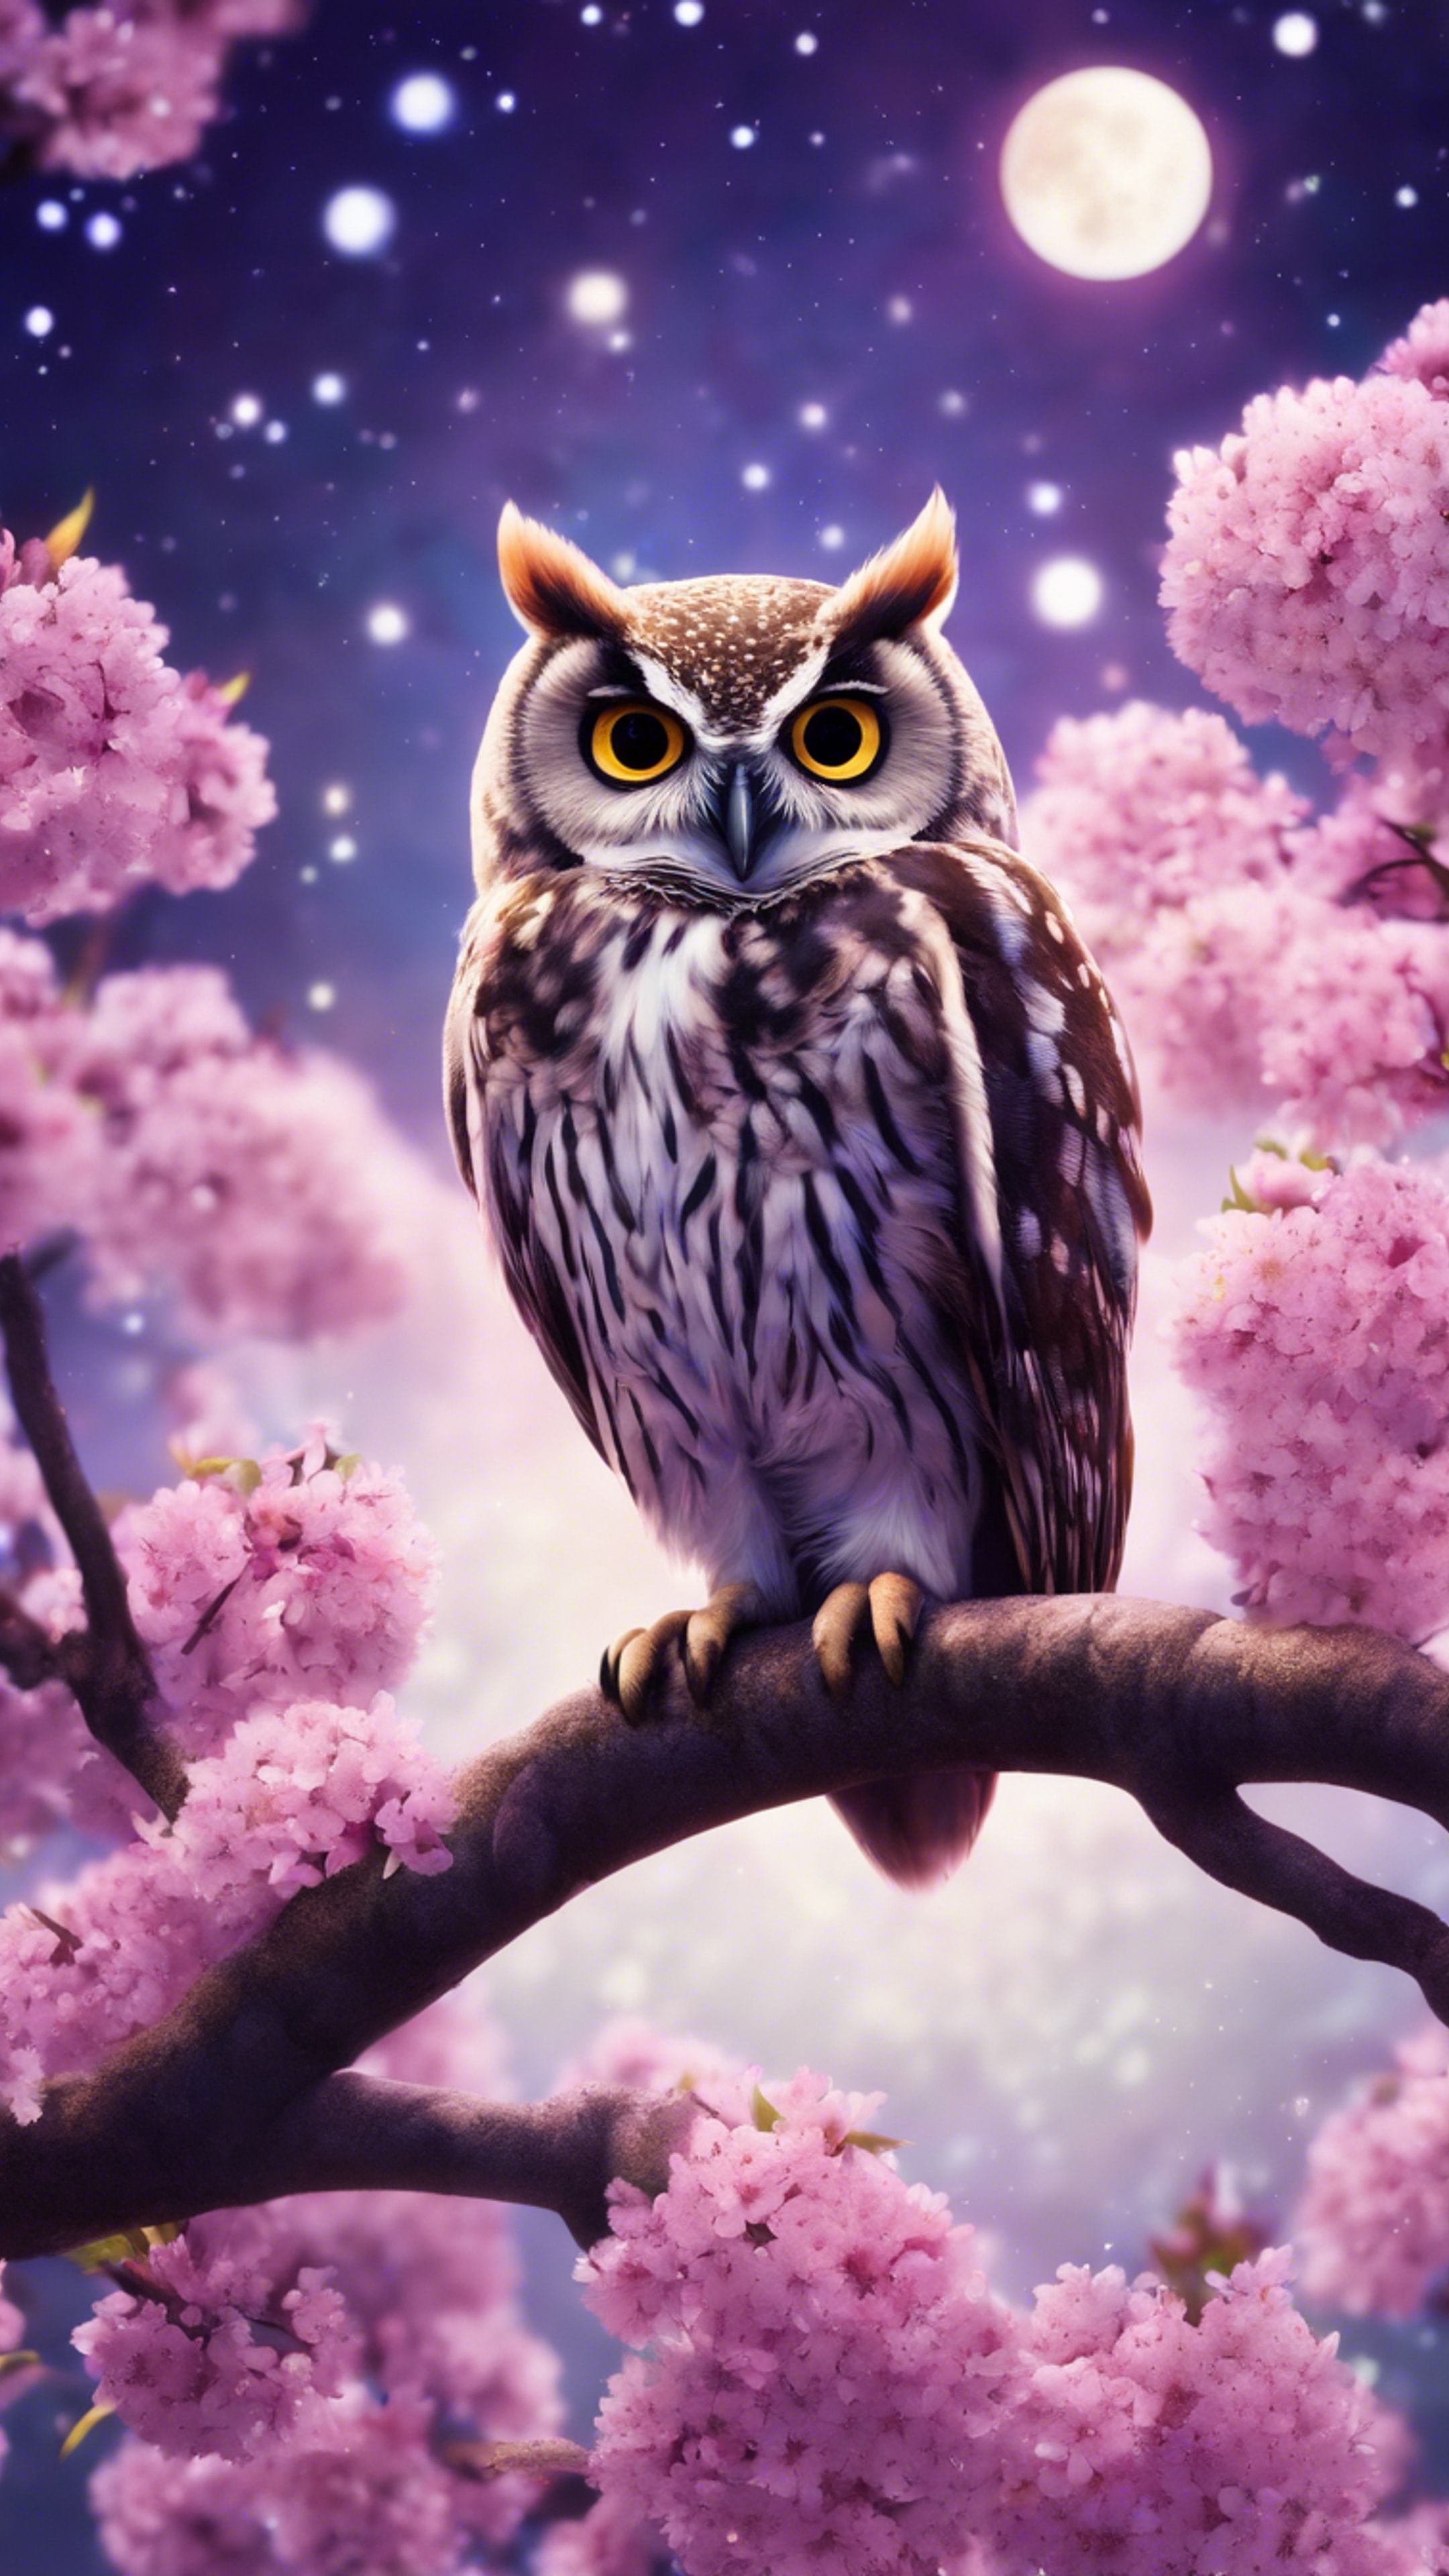 A cute kawaii style owl perched on a cherry blossom tree that blooms vibrant purple flowers, under a moonlit starry night. Tapeta[d4c437875b7e43ac9353]